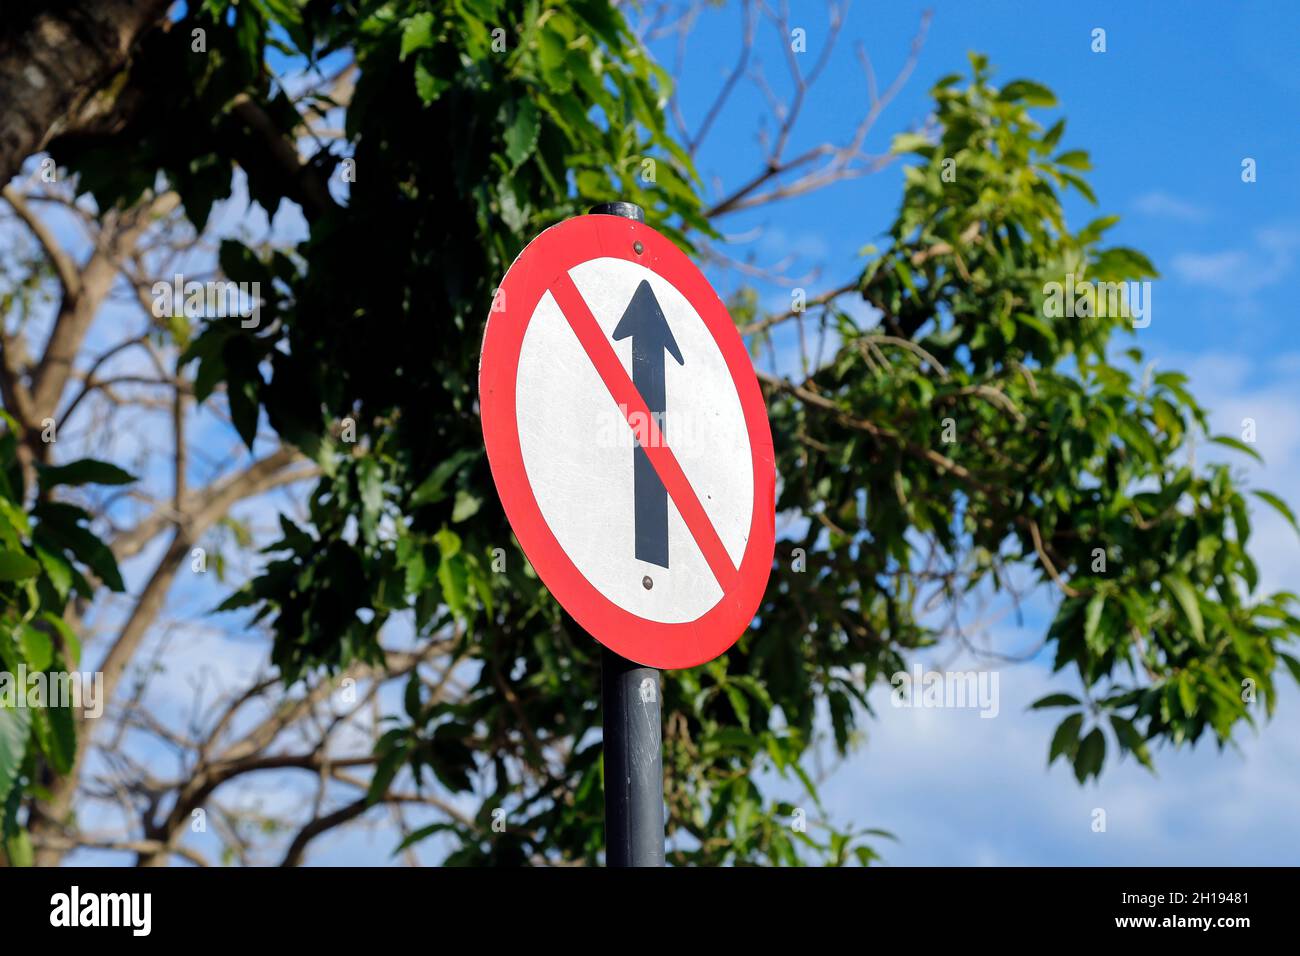 prohibited direction sign - wrong direction traffic signal Stock Photo